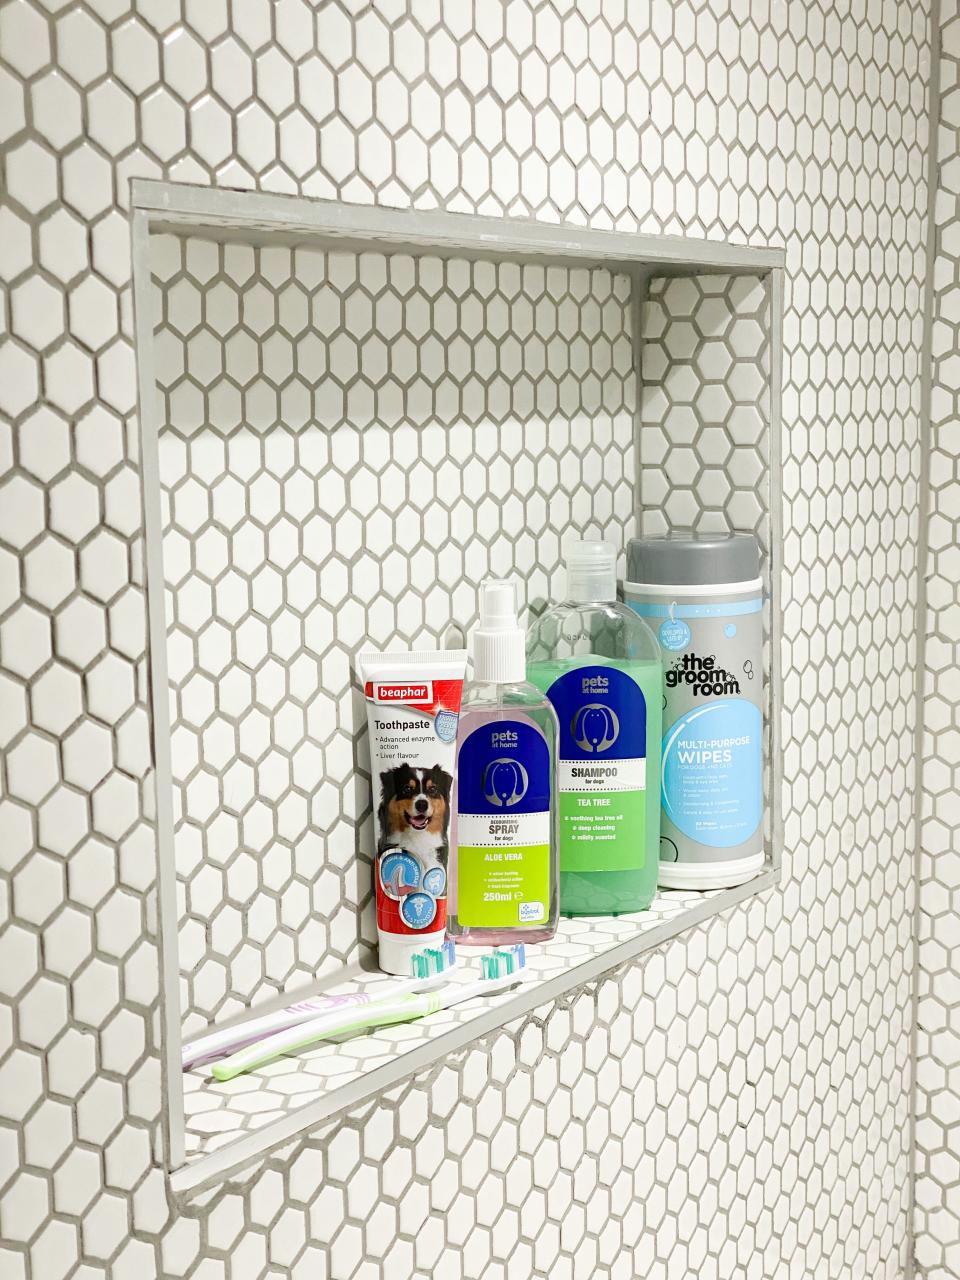 The impressive space has a recessed shelf for all their pooch pamper products. (@homestuffonly and Drench)